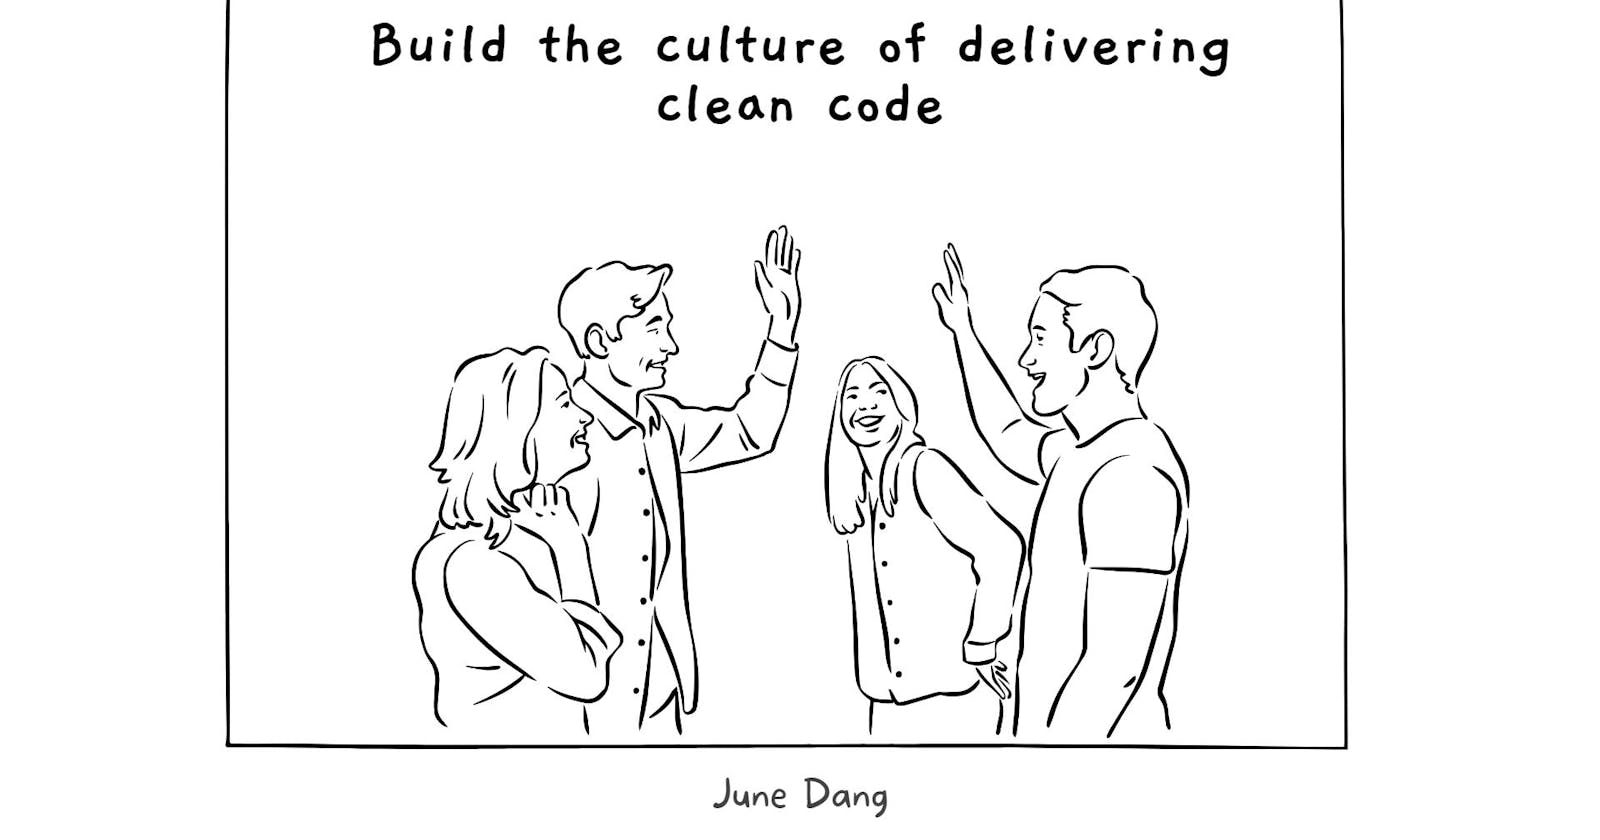 How to build the culture of delivering clean code